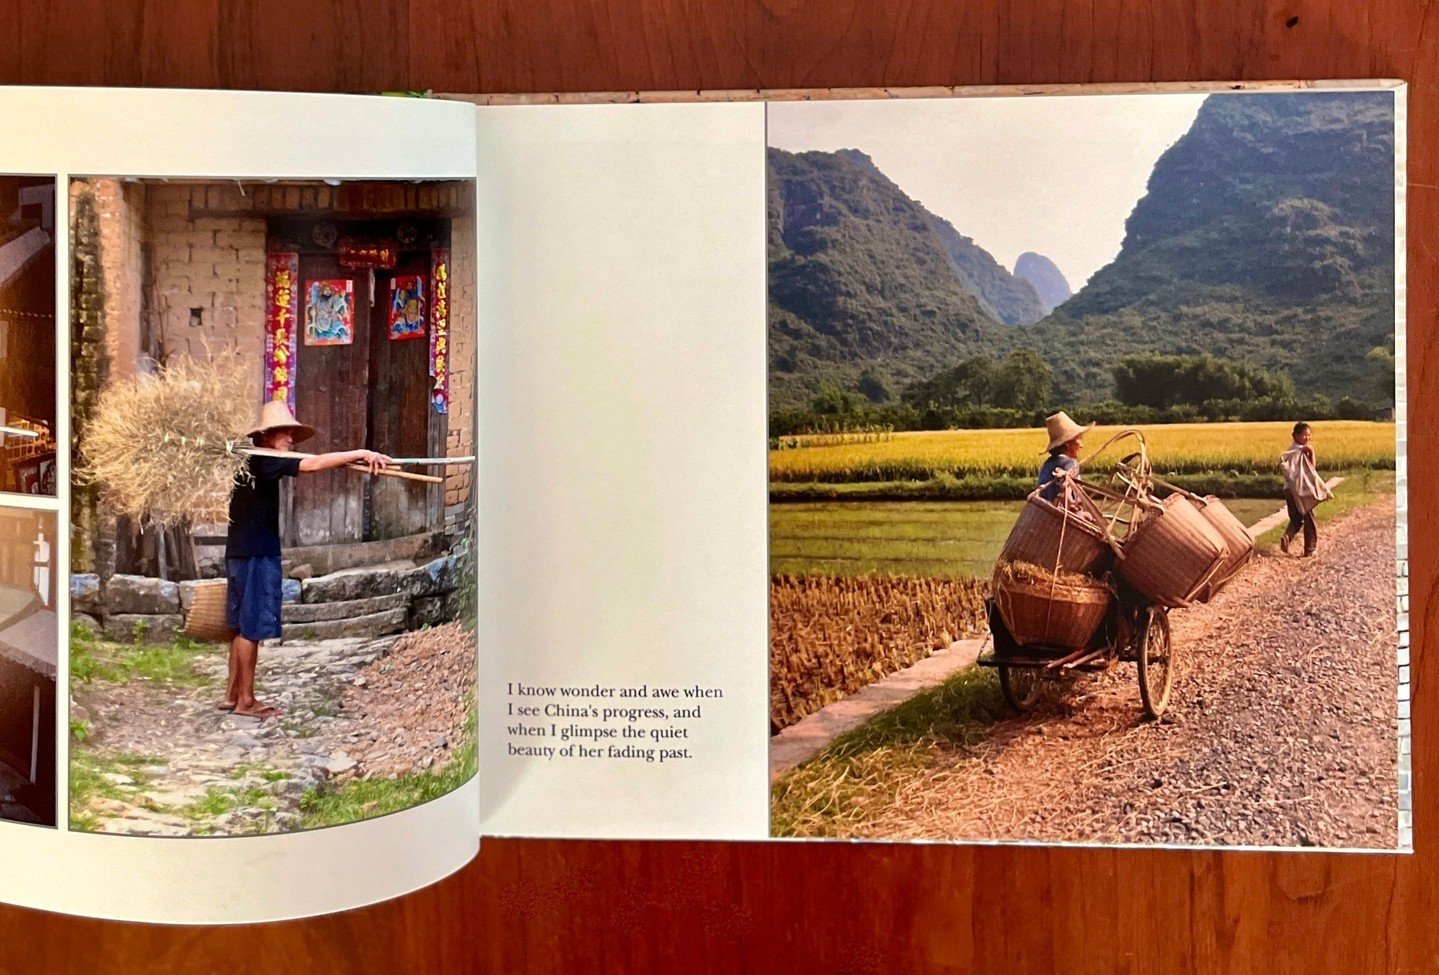 Have you been on an amazing trip? Relive it through an amazing photo book! We've helped a number of clients create photo story books that allow them to revisit those wonderful places and memories. Reach out to see how we can help you!⁠
⁠
#photostory 